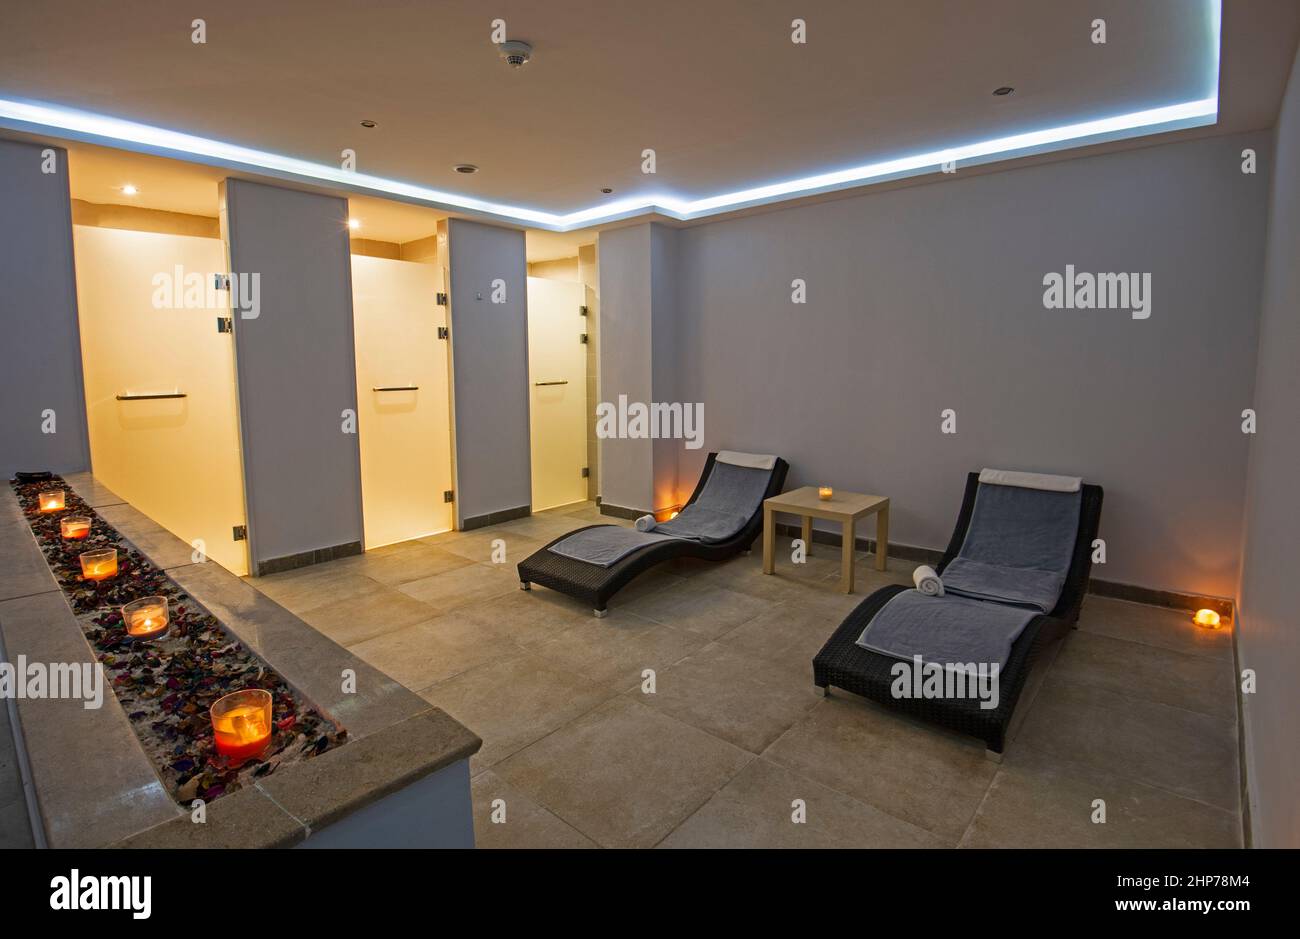 Relaxation area inside a luxury health spa with beds and towels illuminated by candles Stock Photo